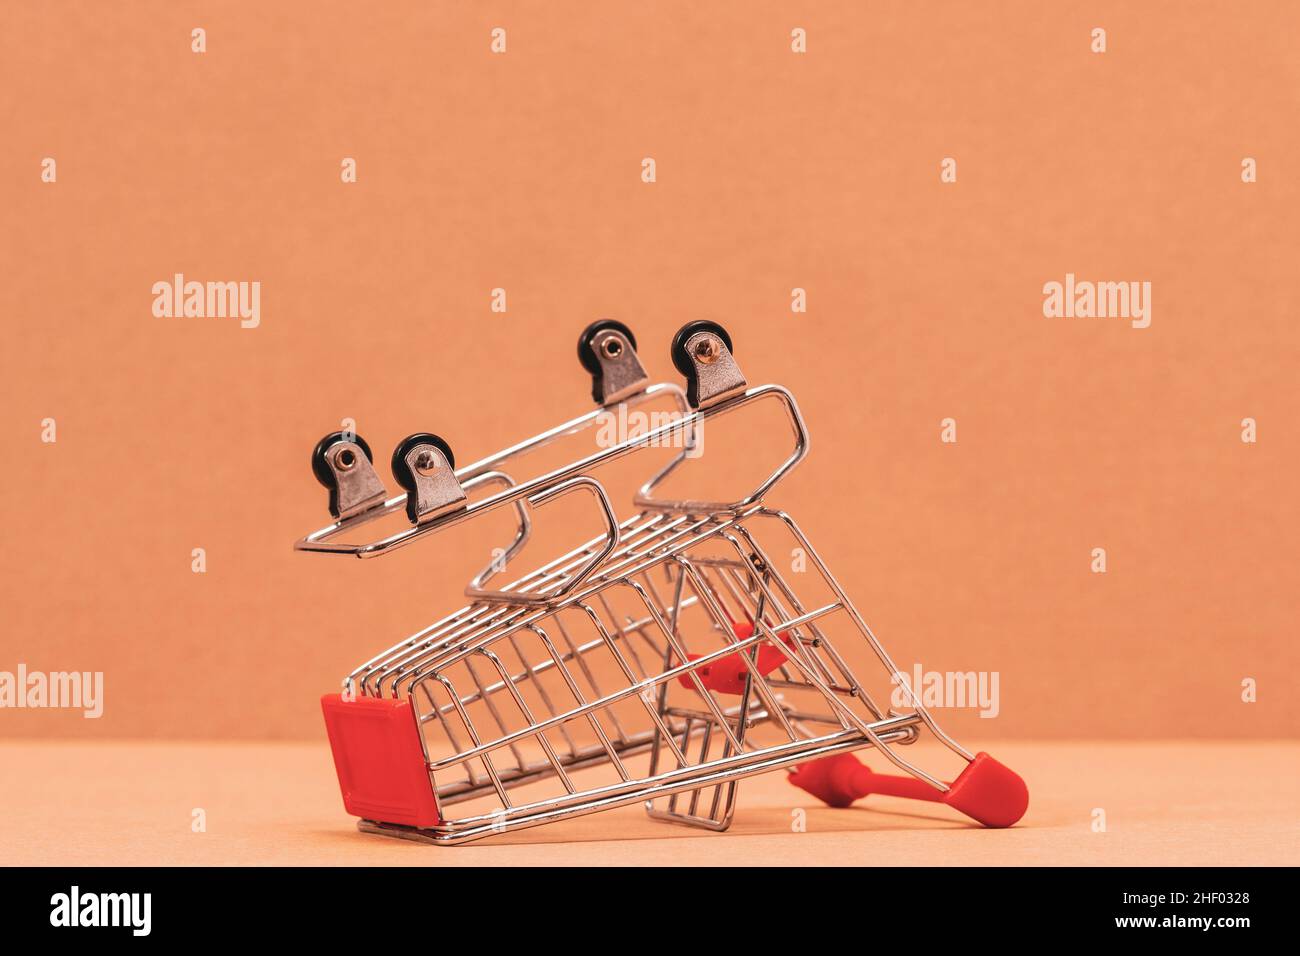 Shopping cart is upturned, concept symbol of bankruptcy, crisis and other. Stock Photo